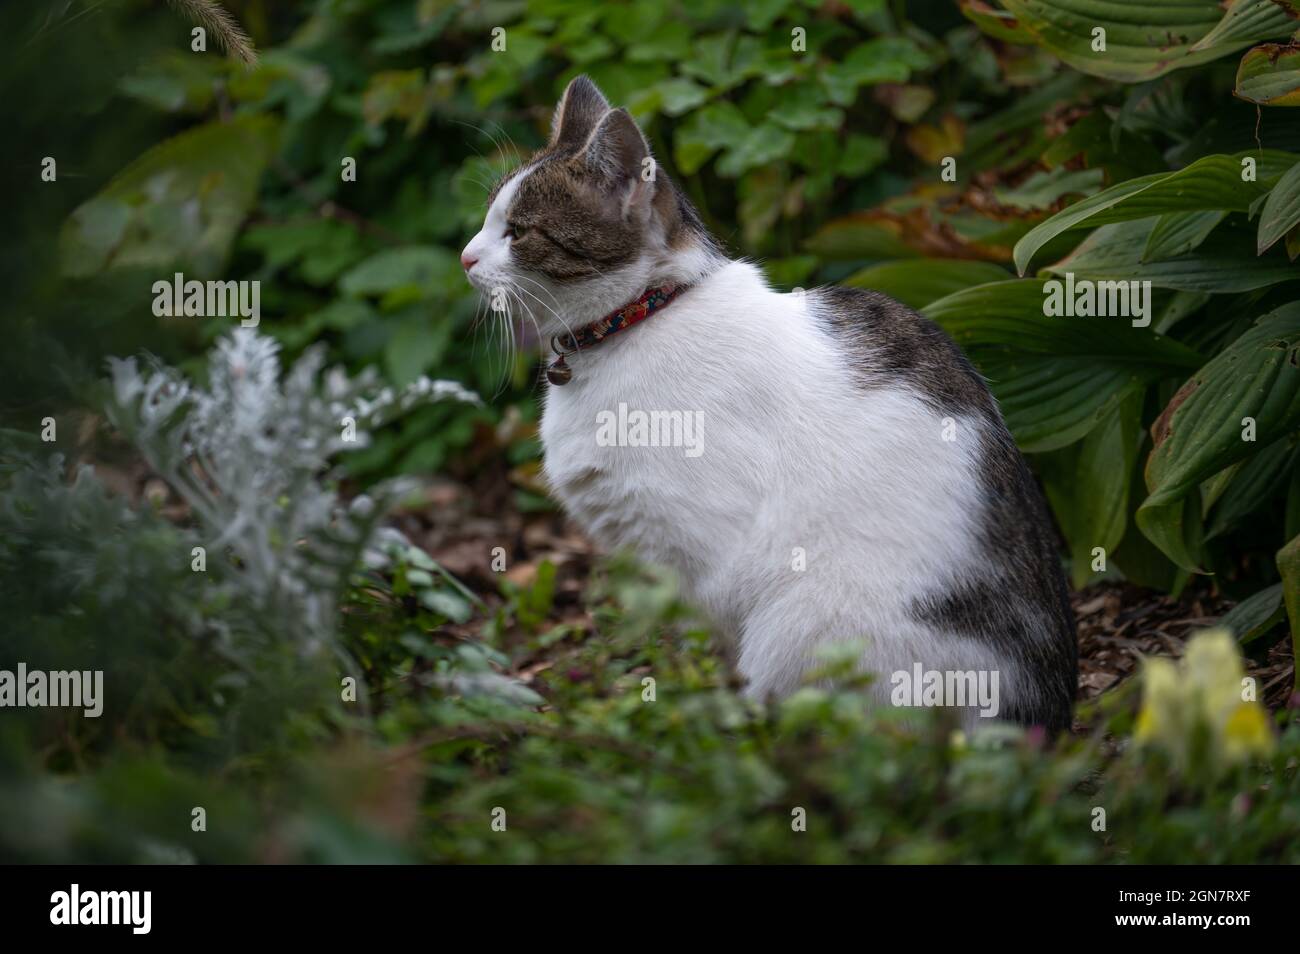 cat with collar on lawn. small cat with a red collar sits in green grass. Cat having outdoor toilet at the lawn Stock Photo